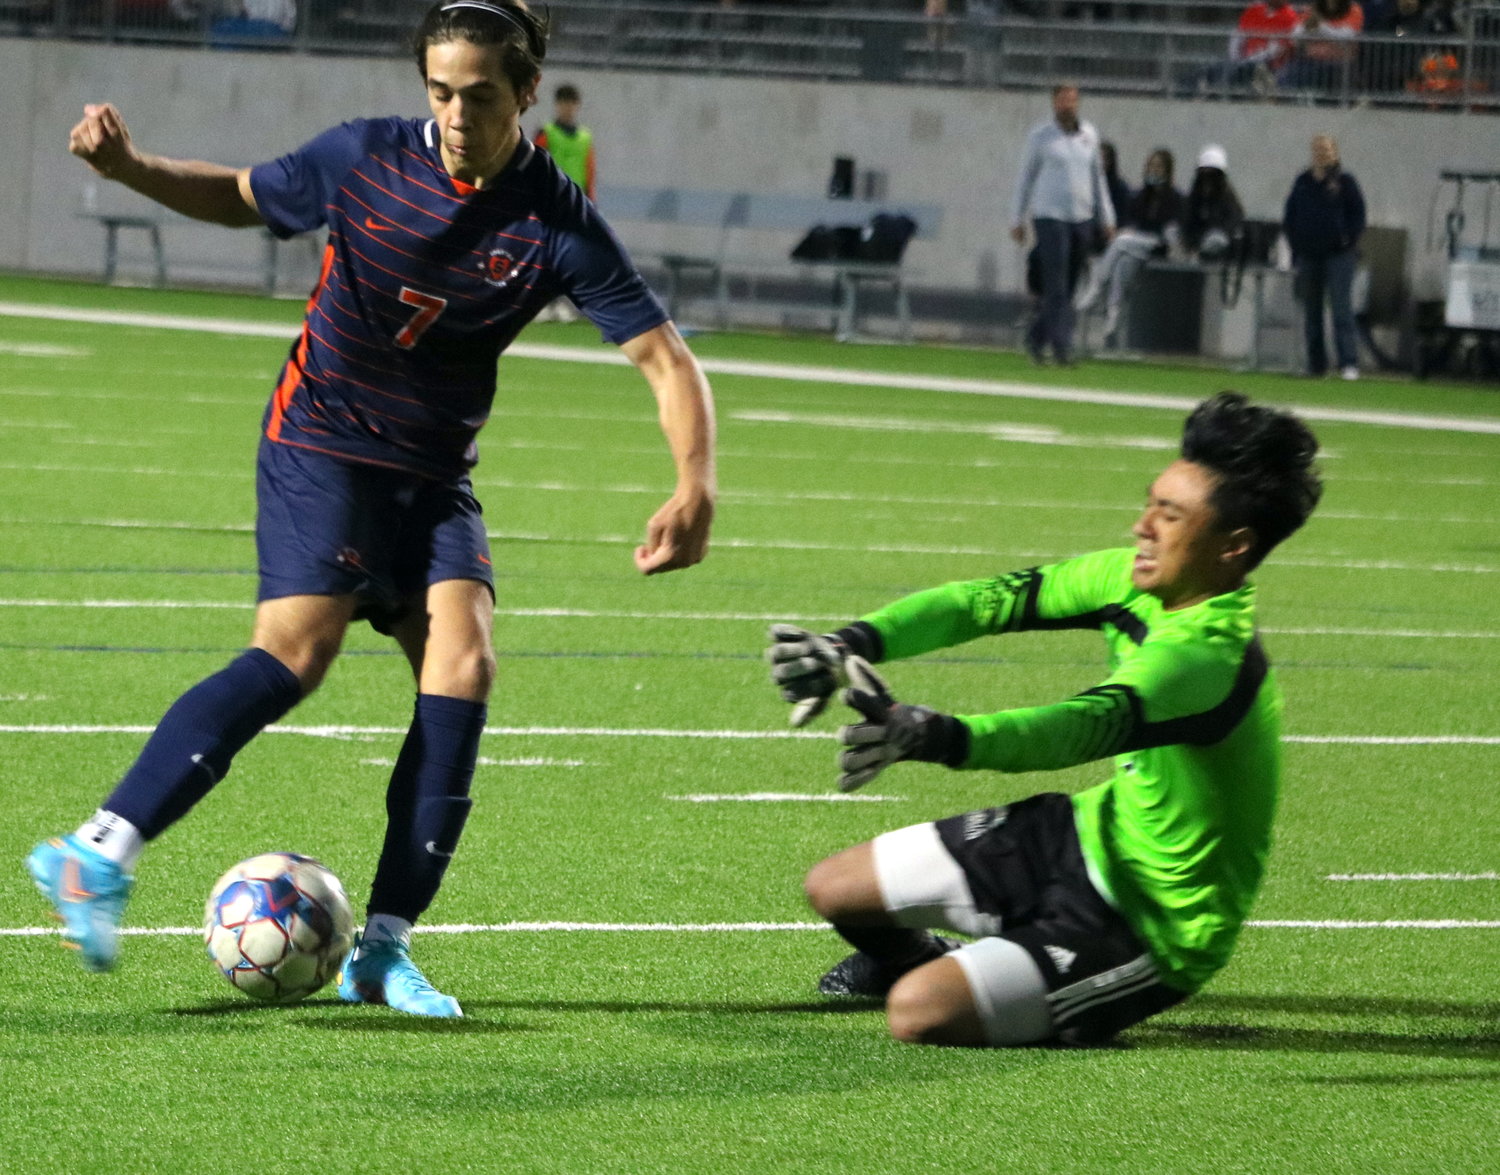 Javier Rivas tries to round the keeper during Thursday’s Class 6A bi-district game between Seven Lakes and Fort Bend Clements at Legacy Stadium.